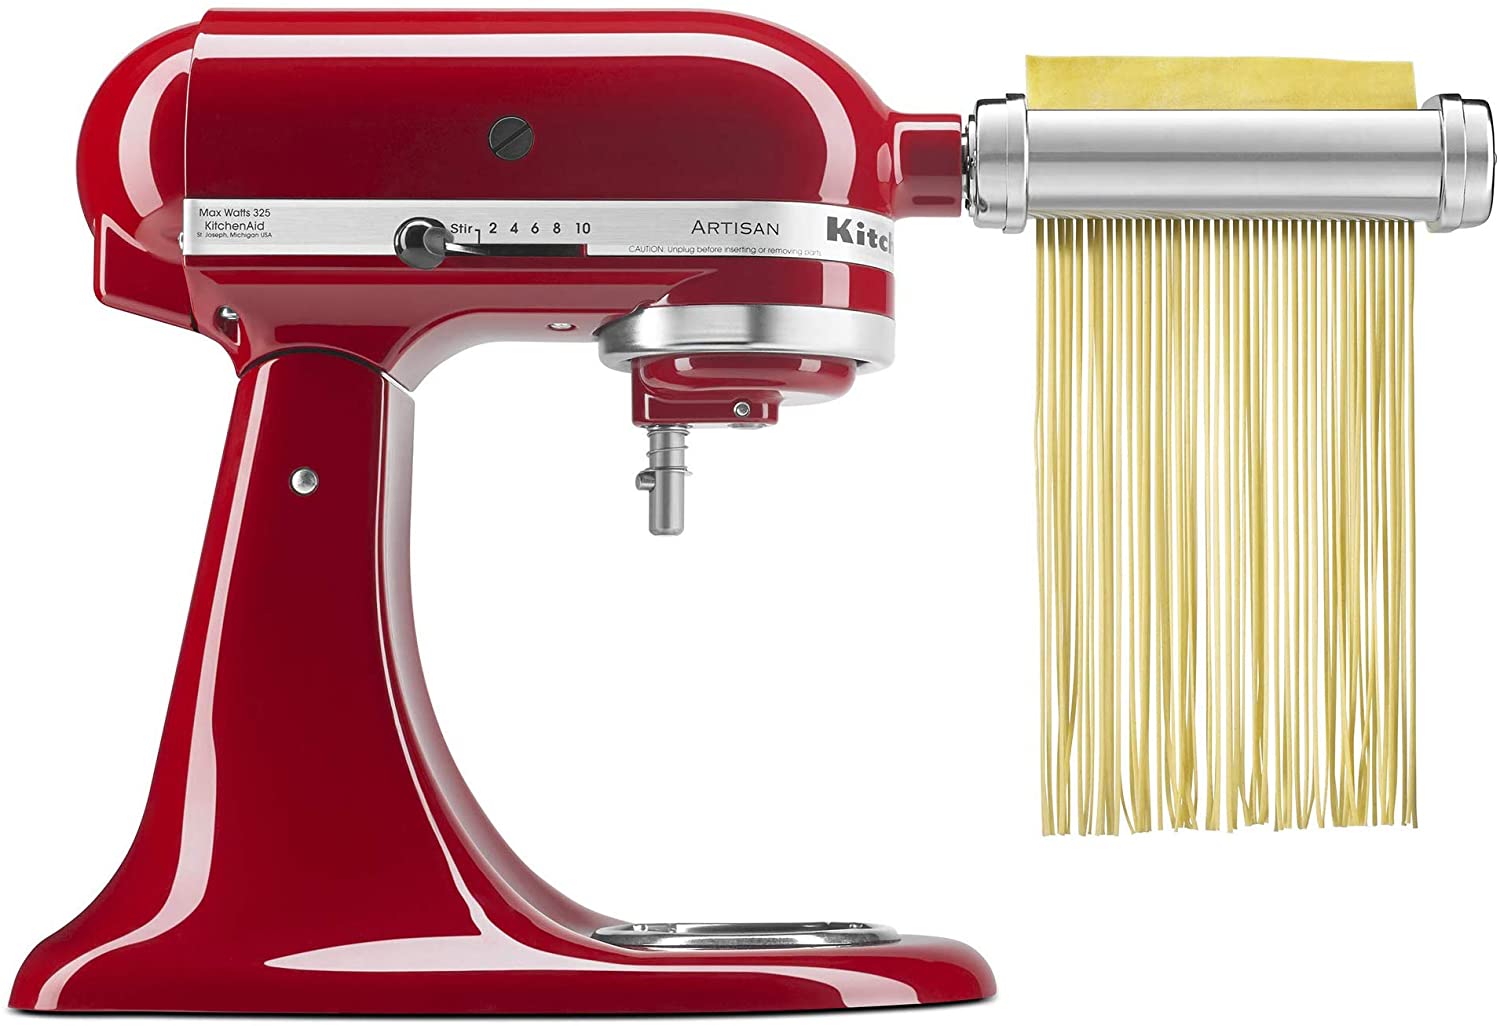  ANTREE Pasta Maker Attachment for KitchenAid Stand Mixers with Pasta  Drying Rack & Cleaning Brush, 3-1 Set includes Pasta Sheet Roller, Spaghetti  Cutter, Fettuccine Cutter : Home & Kitchen